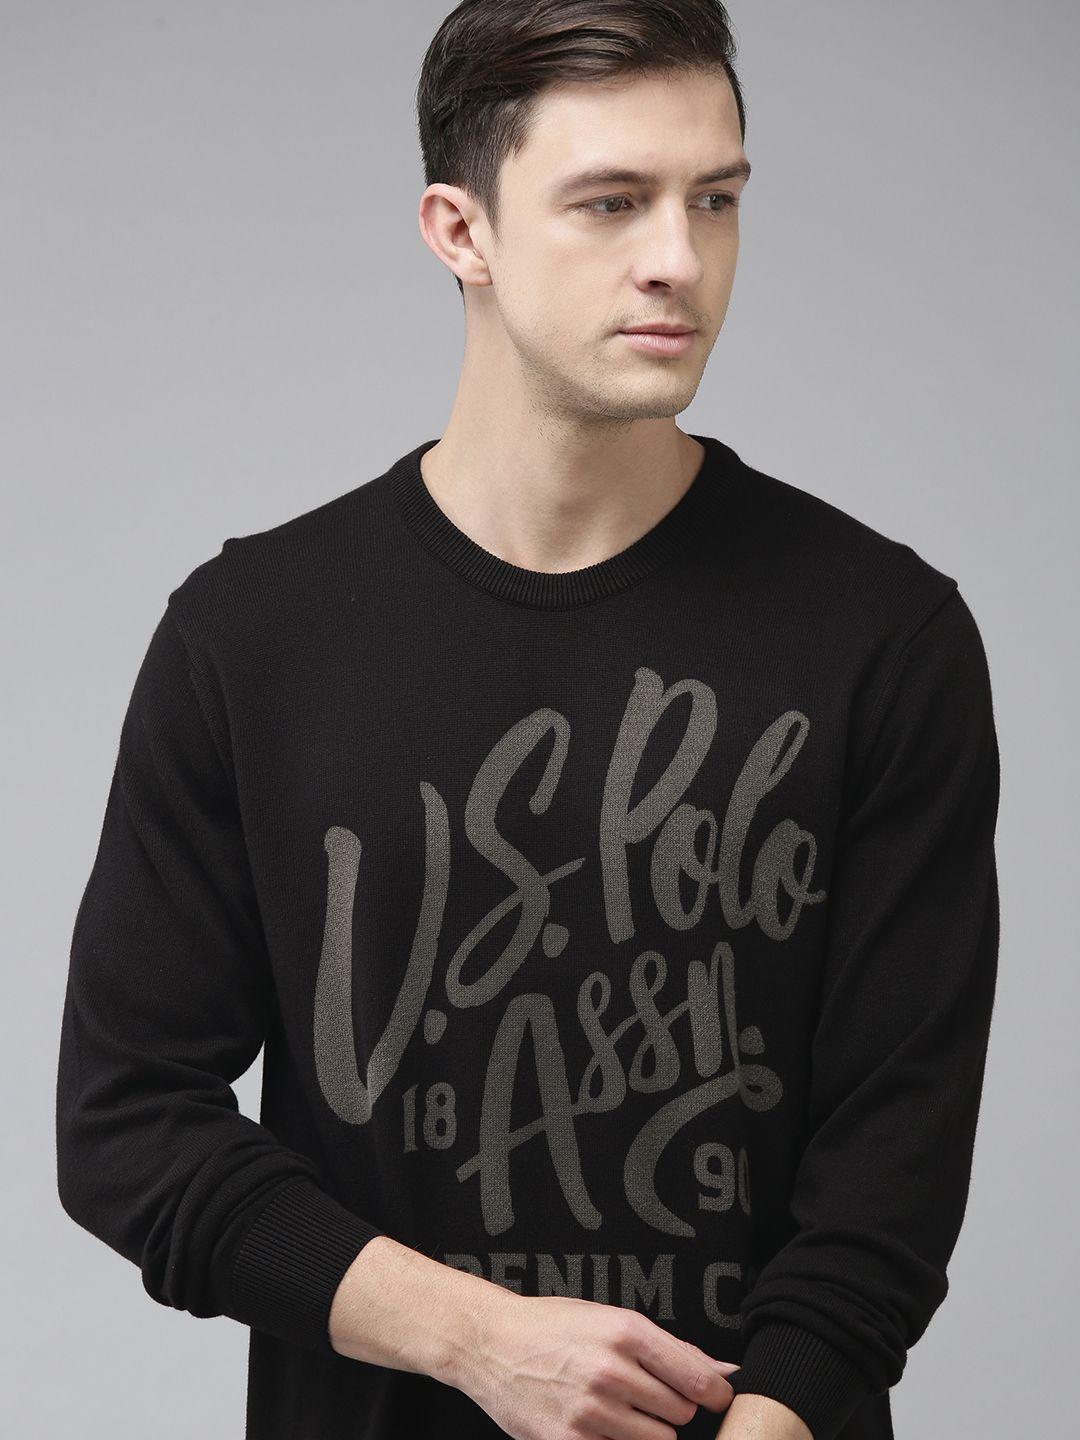 U S Polo Assn Denim Co Men Black & Grey Typography Printed Pullover Sweater